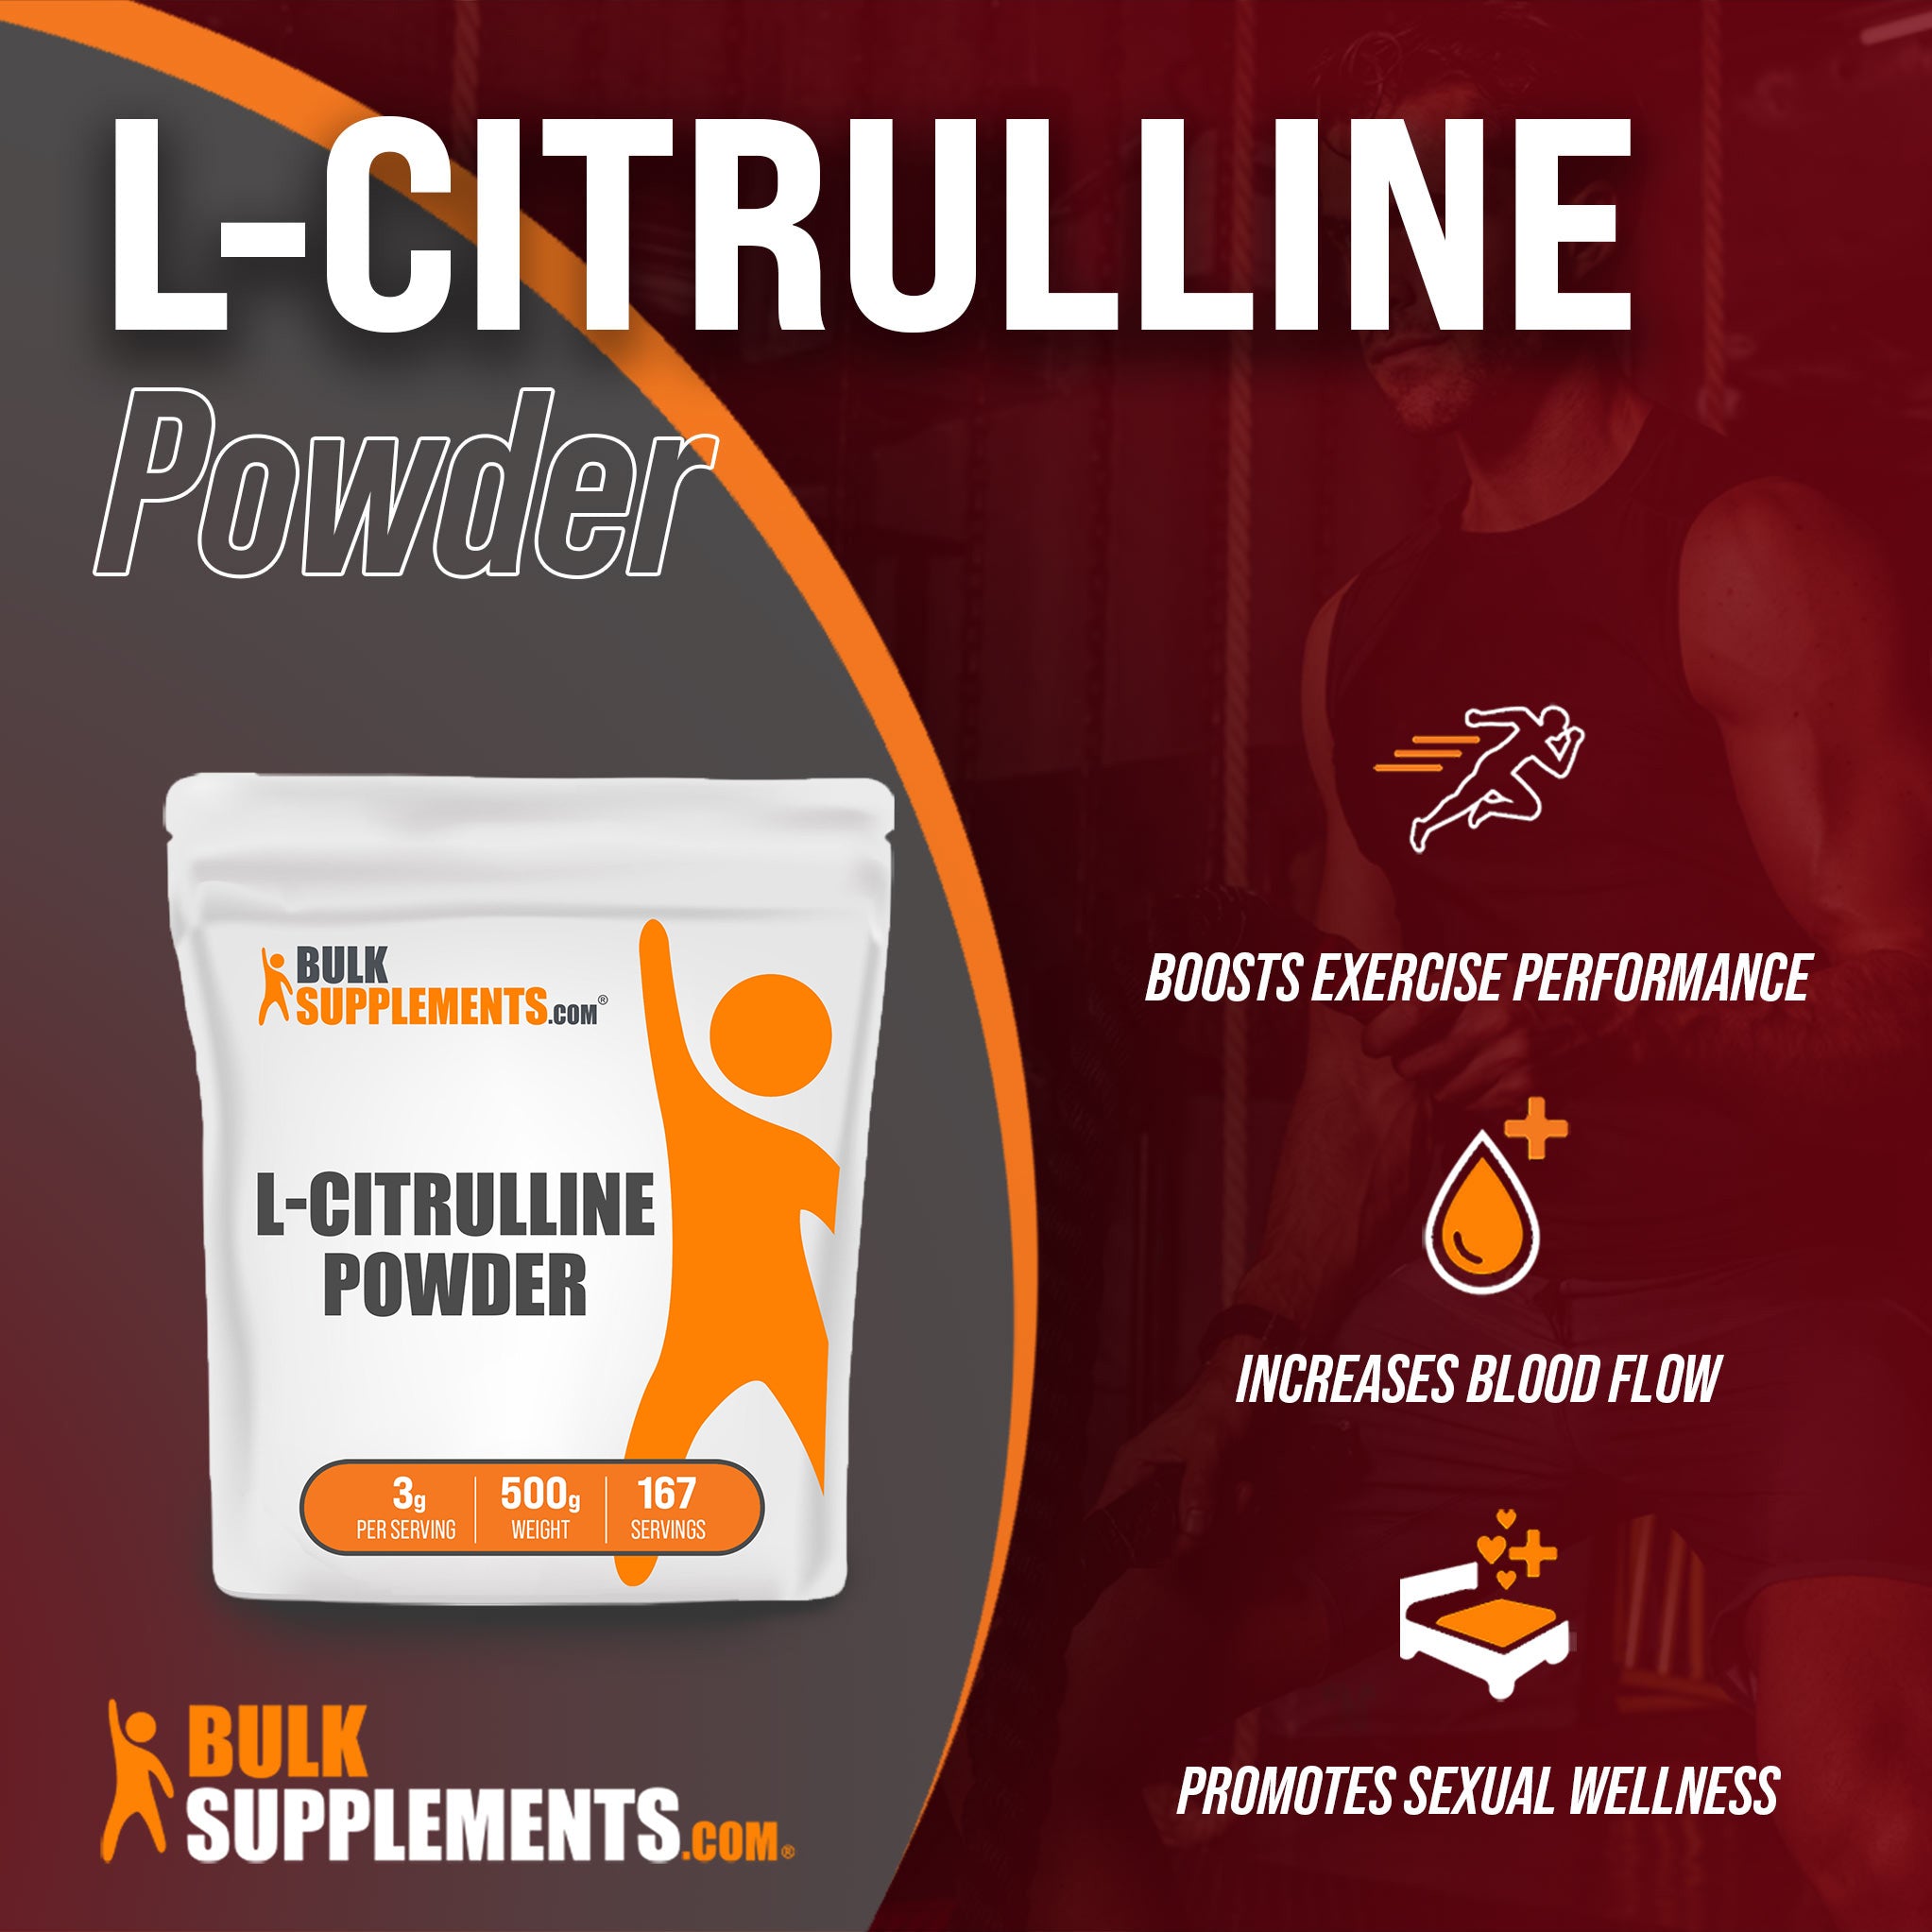 Benefits of L-Citrulline: boosts exercise performance, increases blood flow, promotes sexual wellness